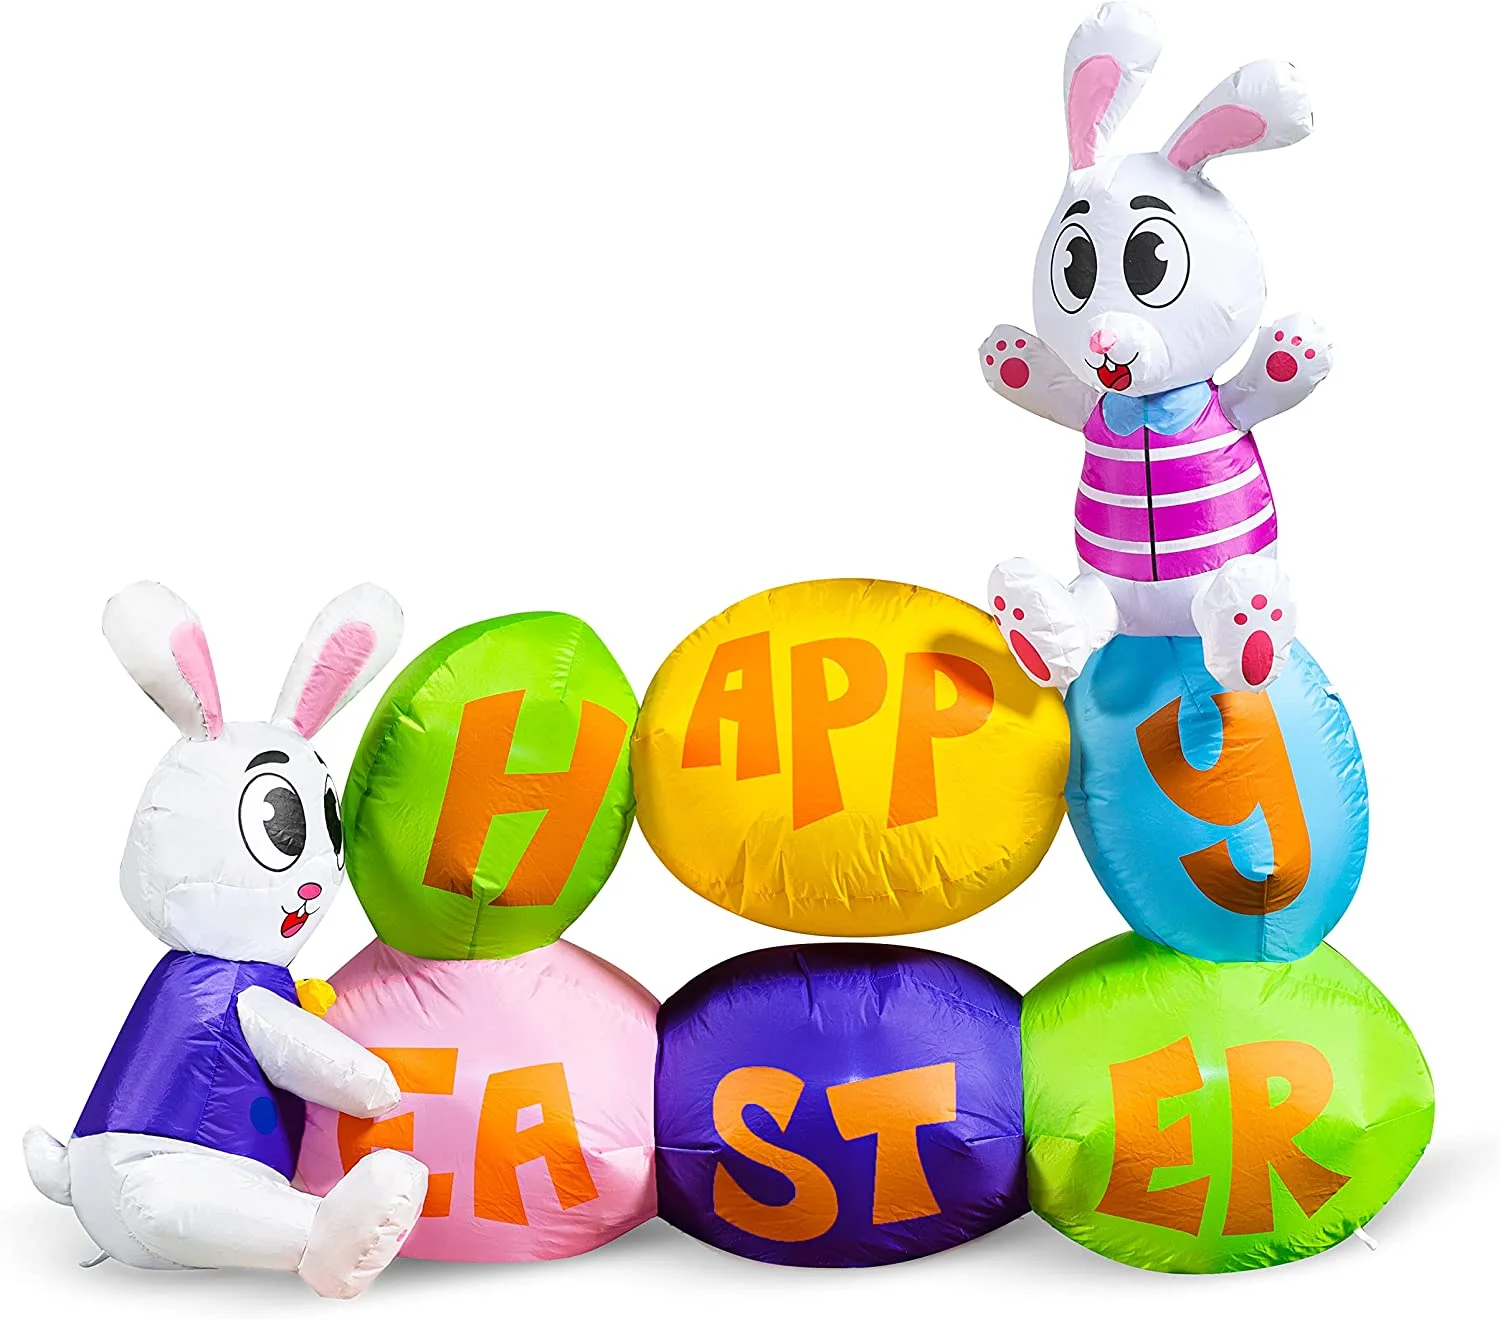 You are currently viewing Are there inflatable Easter decorations that light up at night?